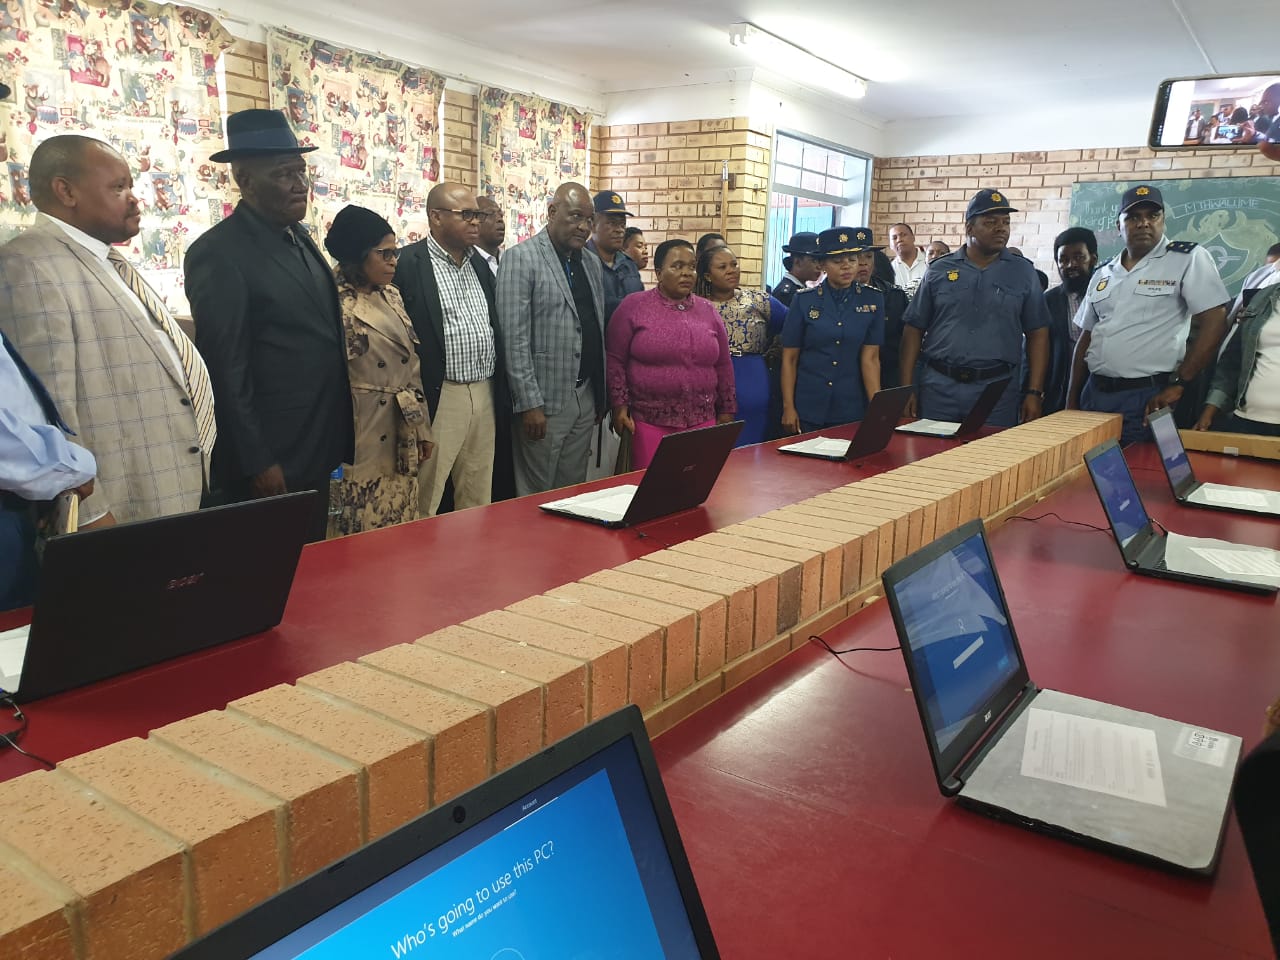 Minister Bheki Cele and PSIRA hand raise awareness in relation to school safety and cyber security.